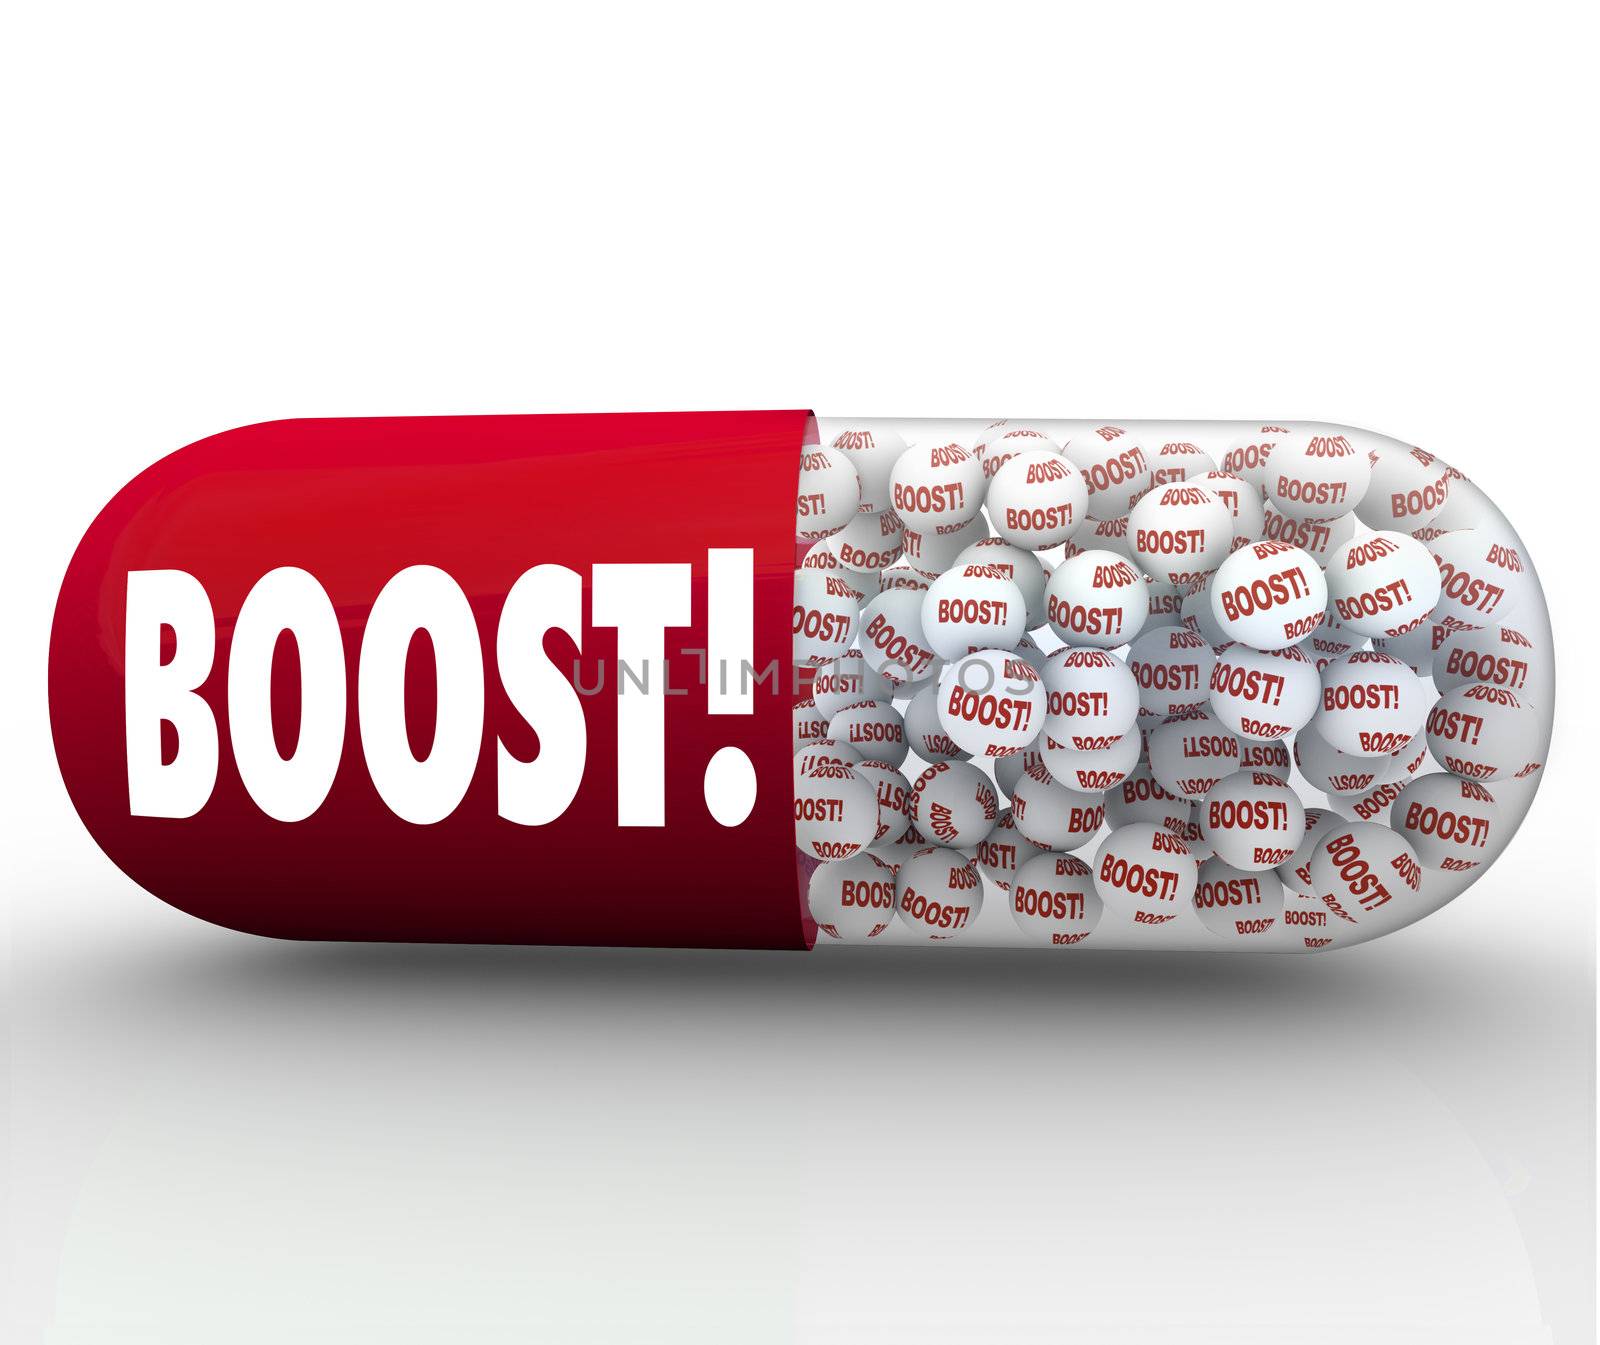 A red capsule pill with the word Boost and small medicine balls inside it that is meant to revitalize or give a jolt of energy 